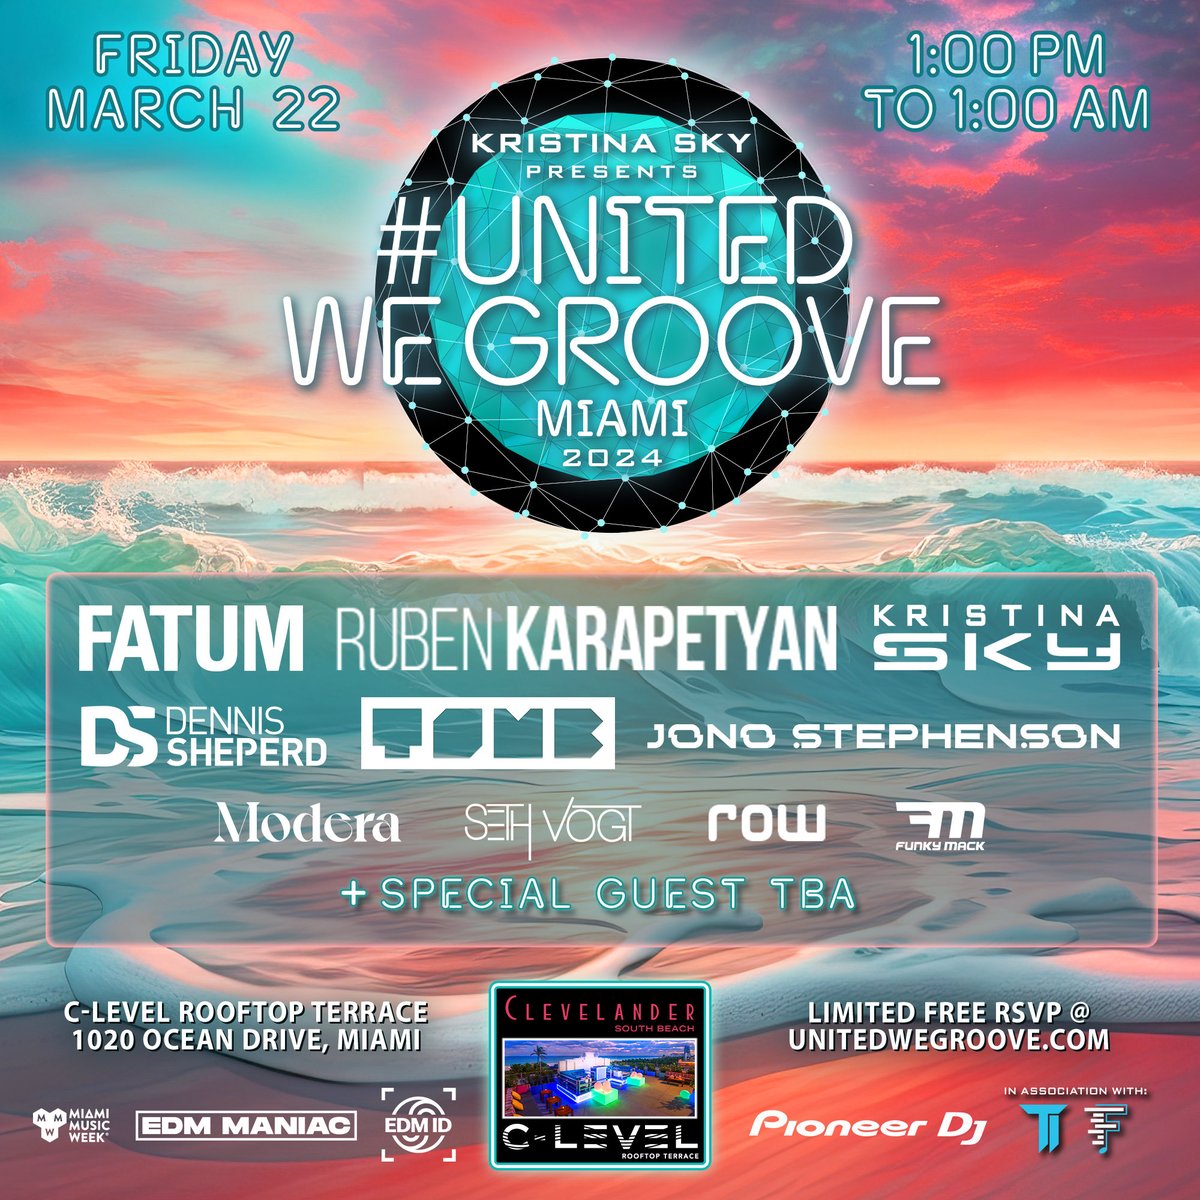 Boom! 💥 Phase 2 lineup for the @UnitedWeGroove_ Miami rooftop is here 🌅 Who’s joining us?? 🤗 Free w/ RSVP: bit.ly/UnitedWeGroove… #miami #mmw #miamimusicweek 🌆🌴